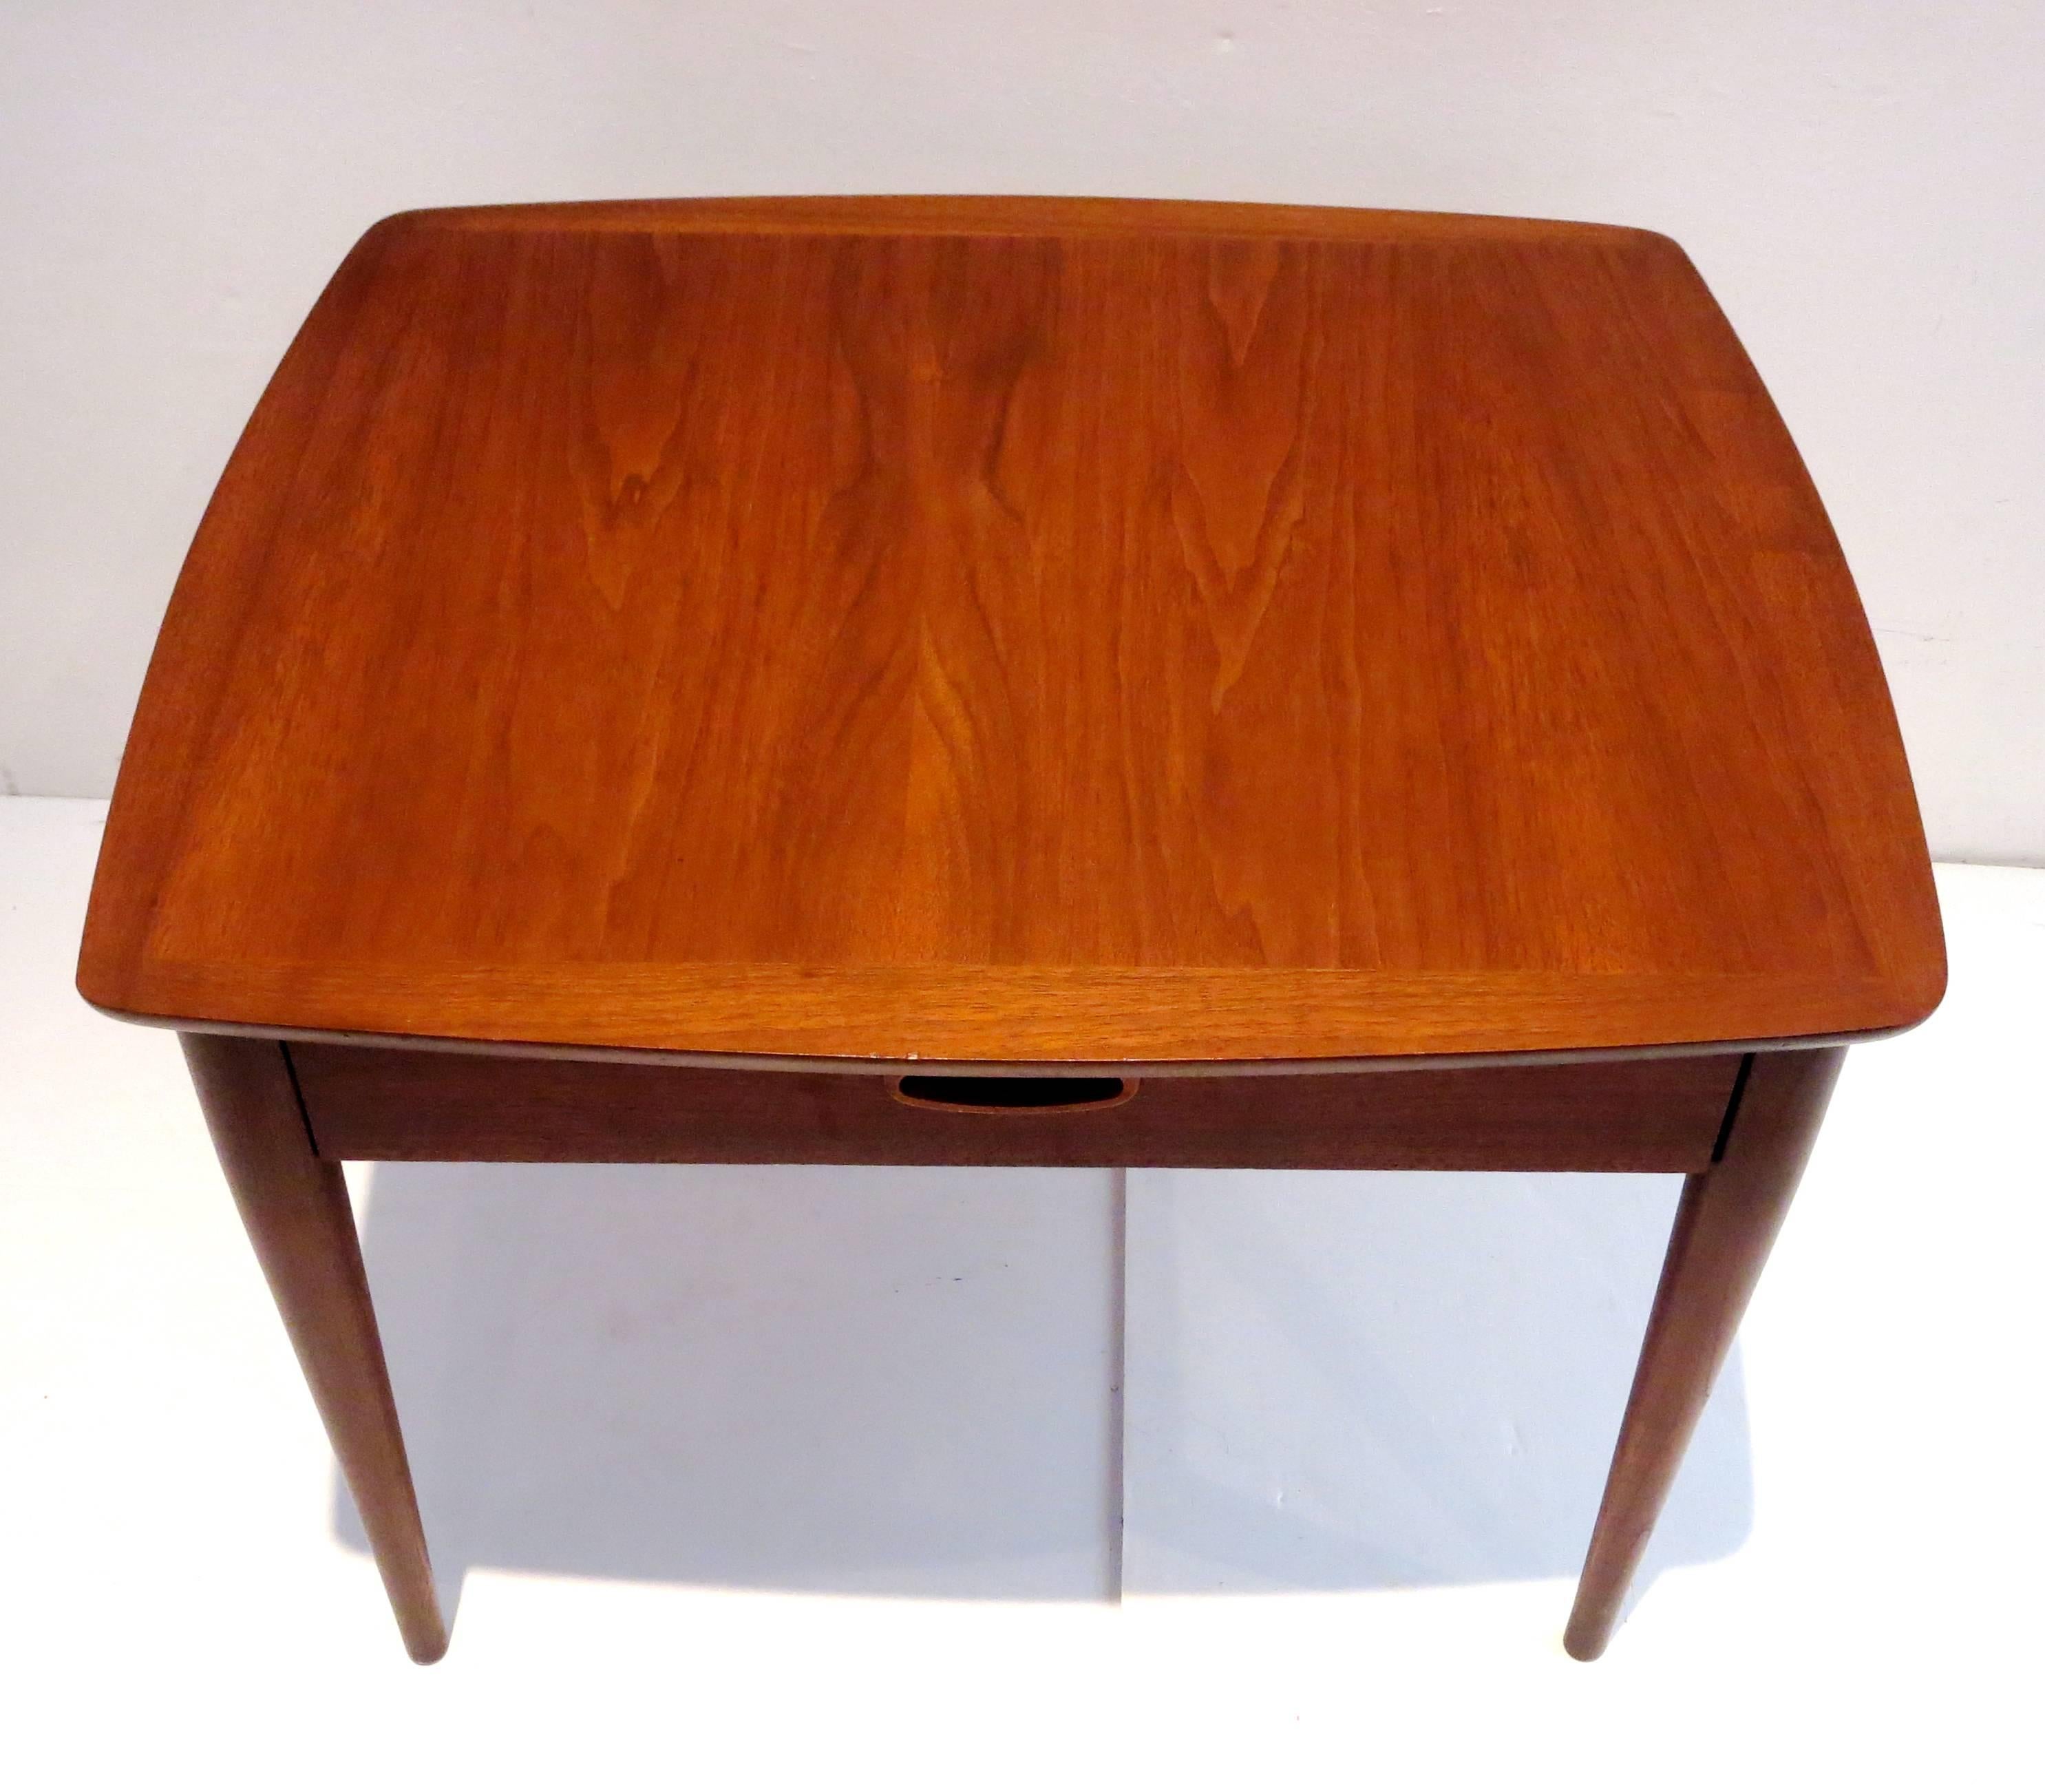 American 1950s Danish Modern End Table in Walnut with Drawer